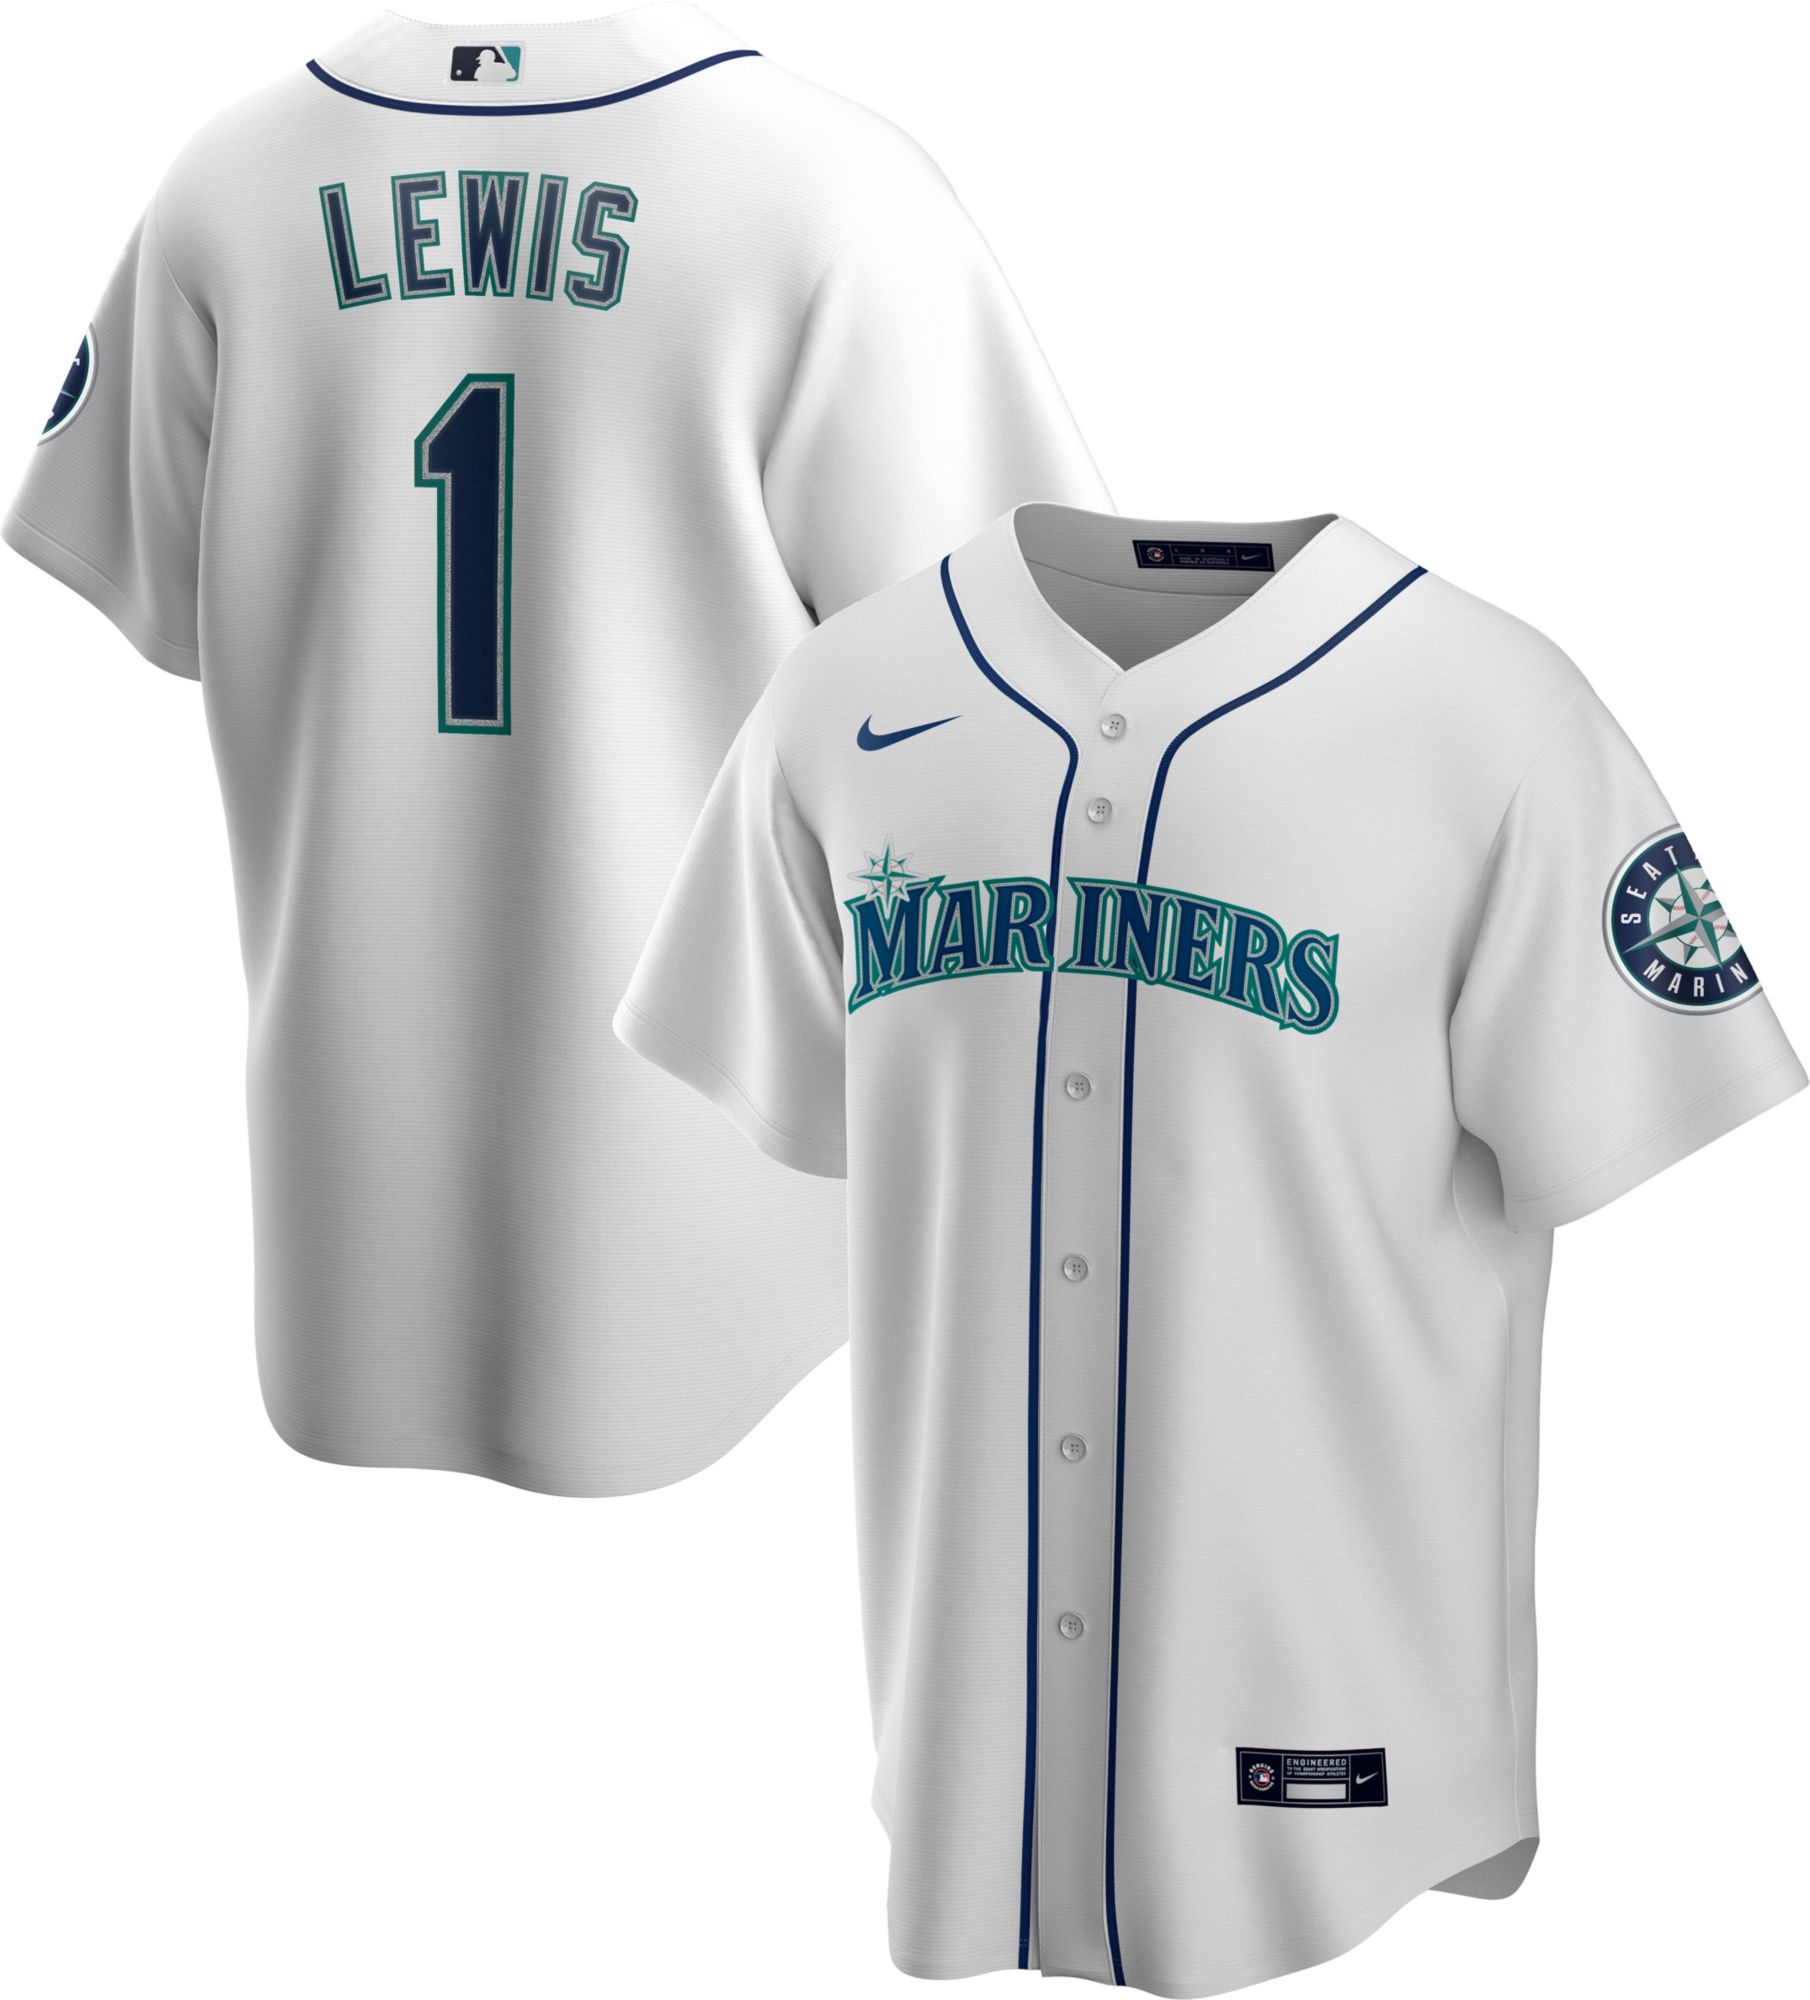 Seattle Mariners Authentic White Jersey Nike - KYLE LEWIS, Size 40